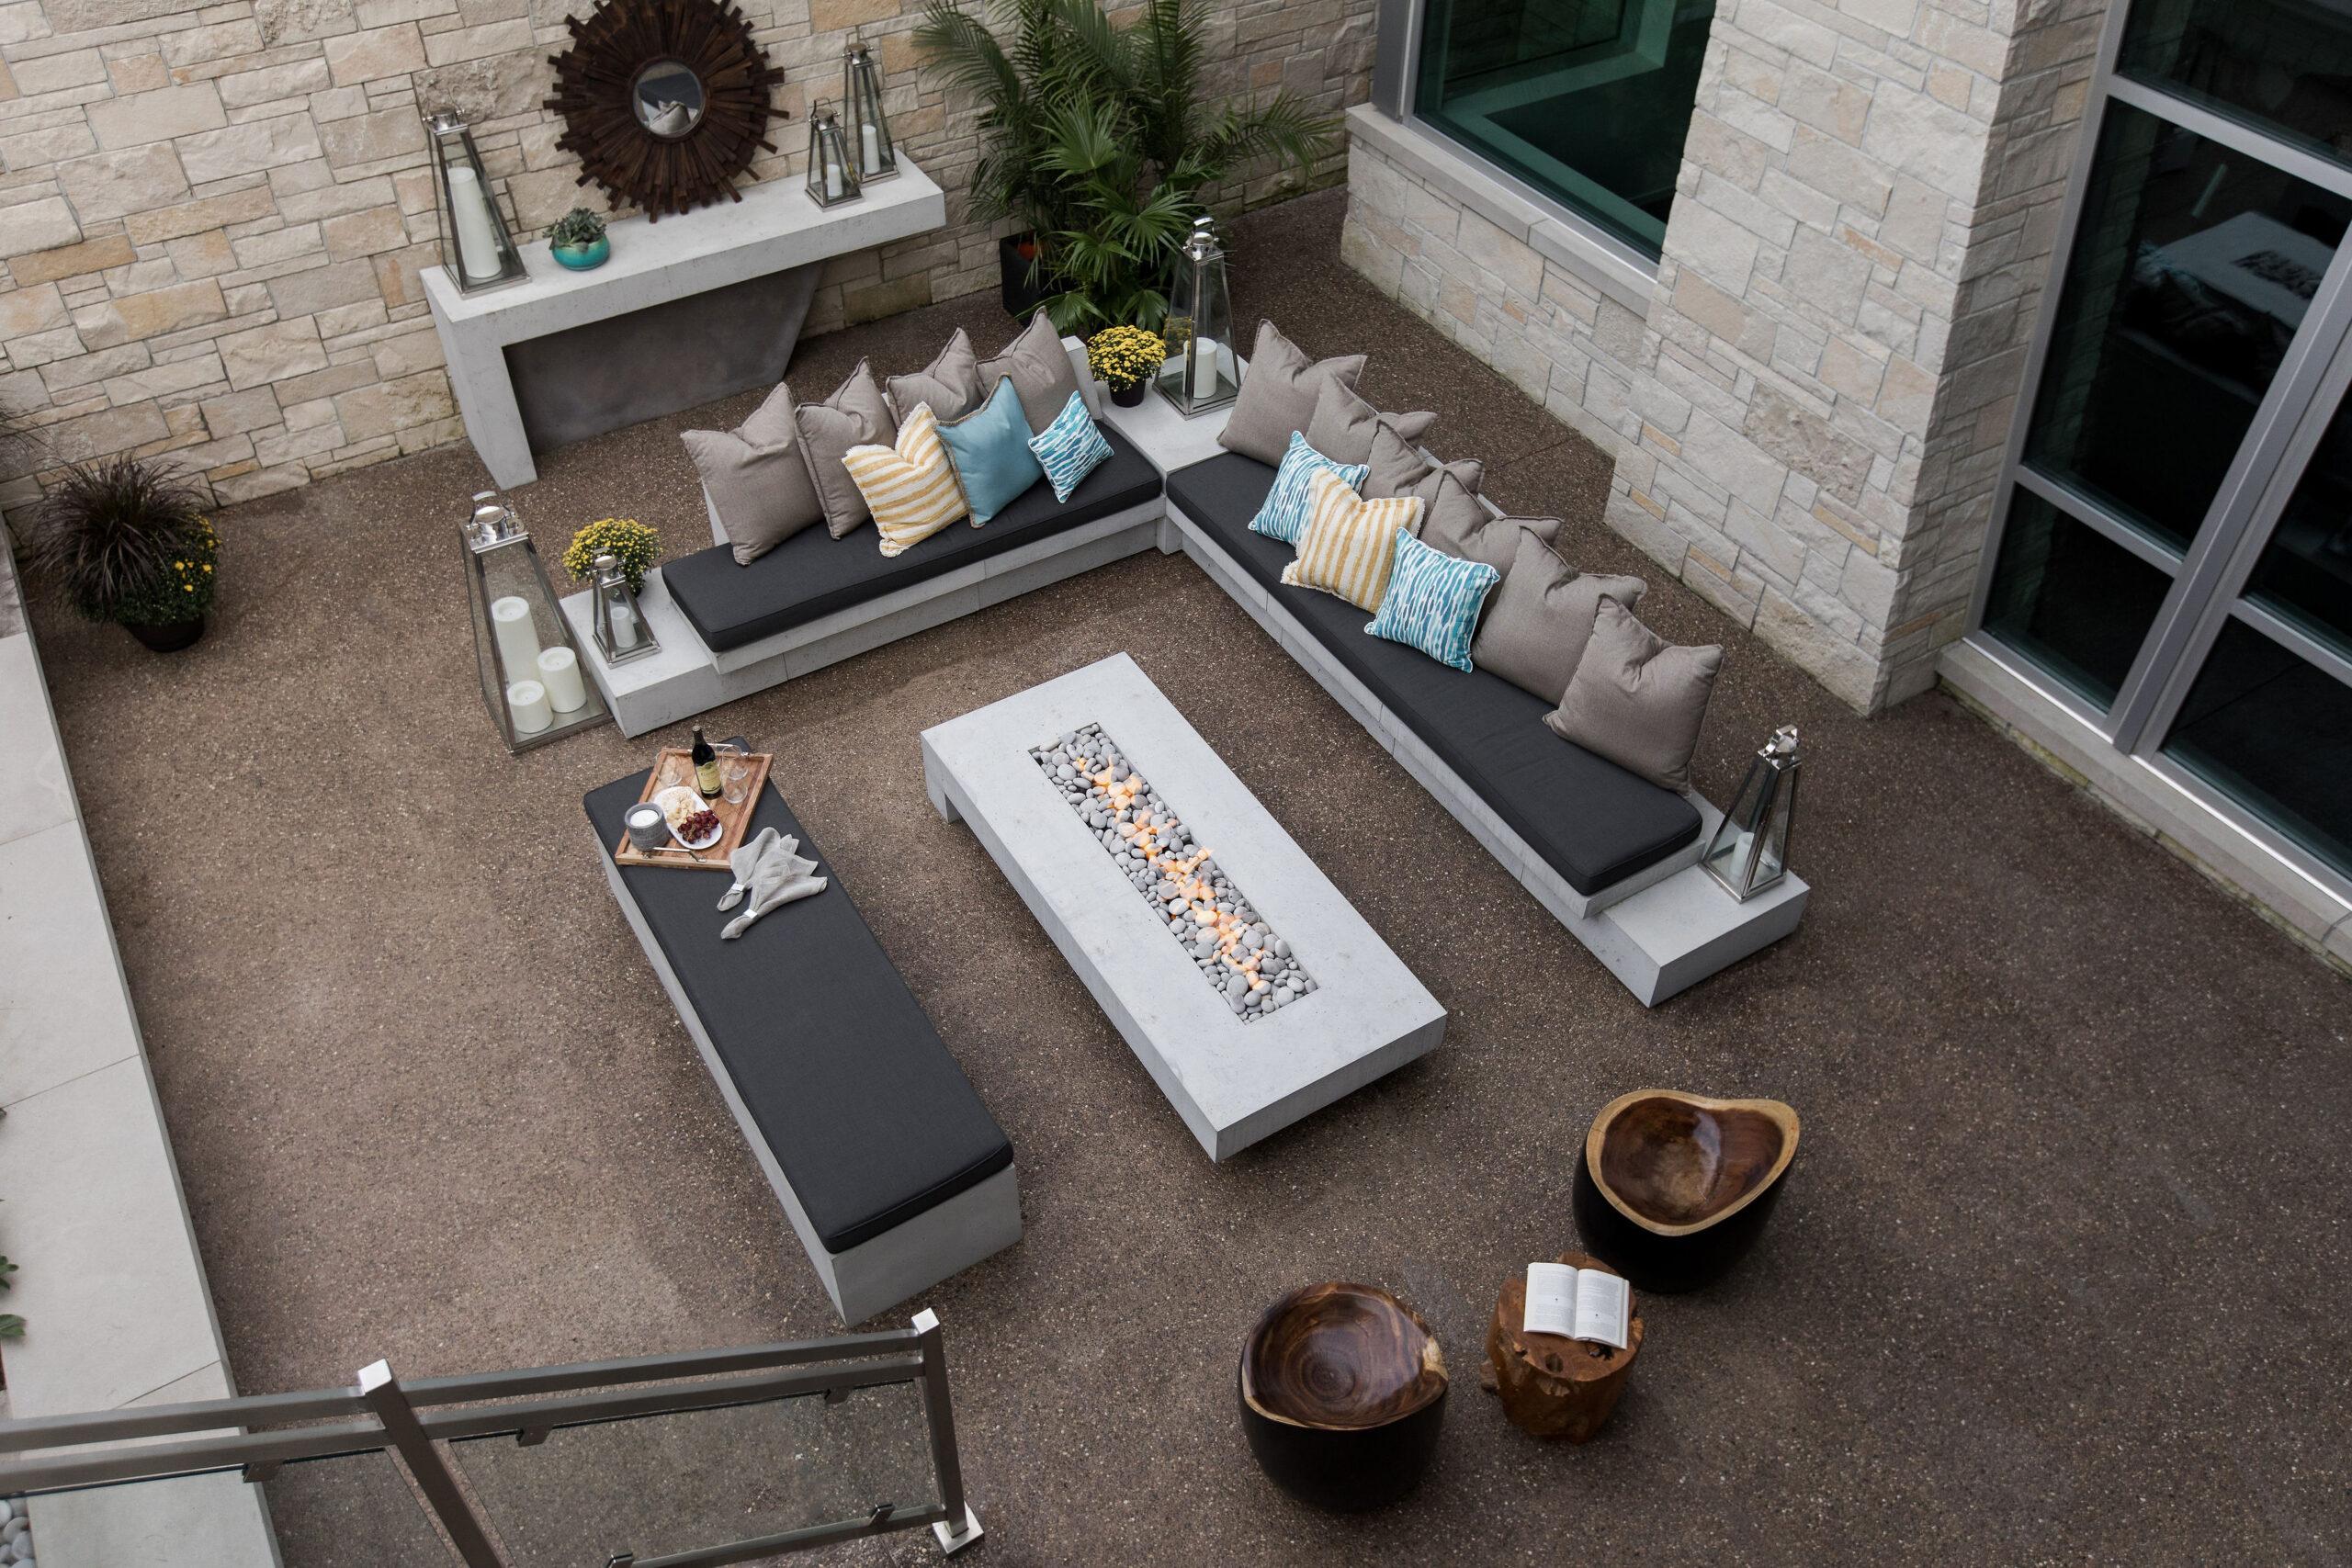 Dekko’s lightweight concrete fire pit and a concrete table with three benches surrounding it outside full of pillows.